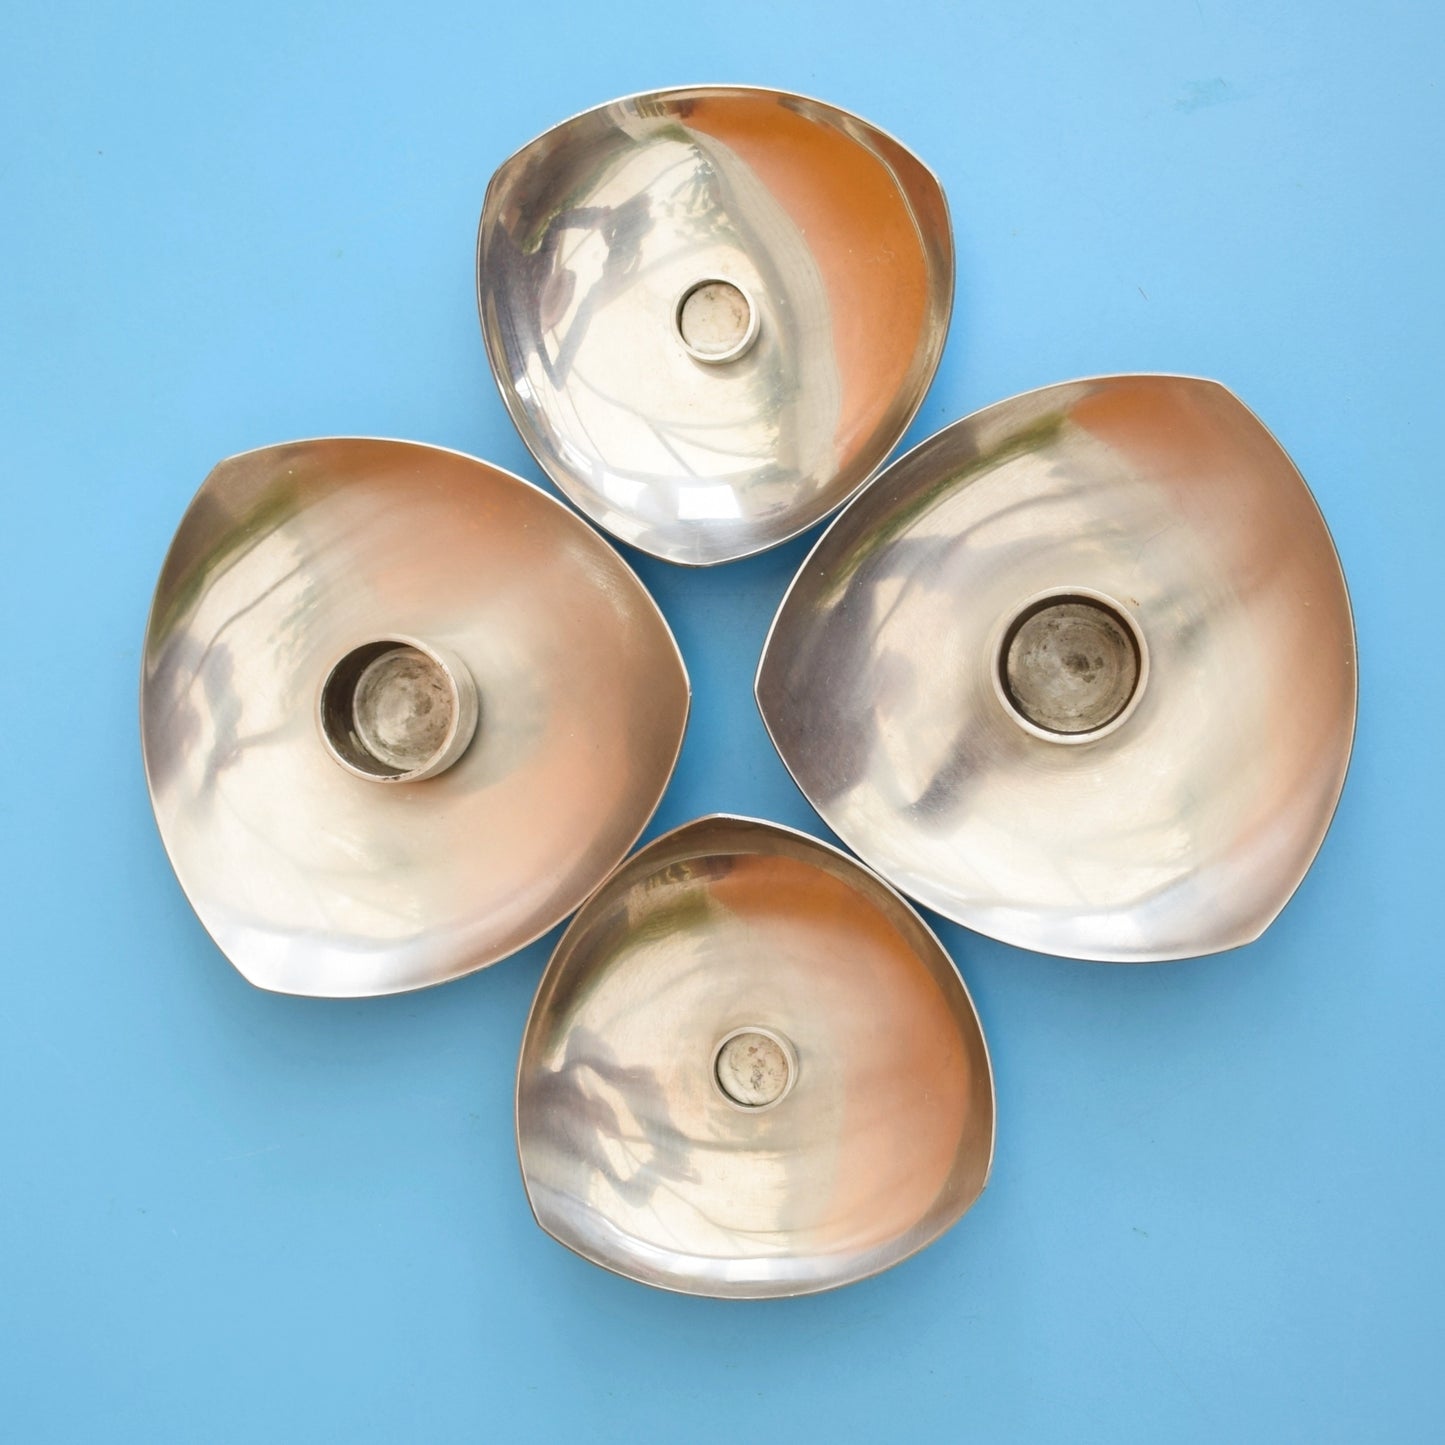 Vintage 1970s Stainless Steel Danish Candle Holders .